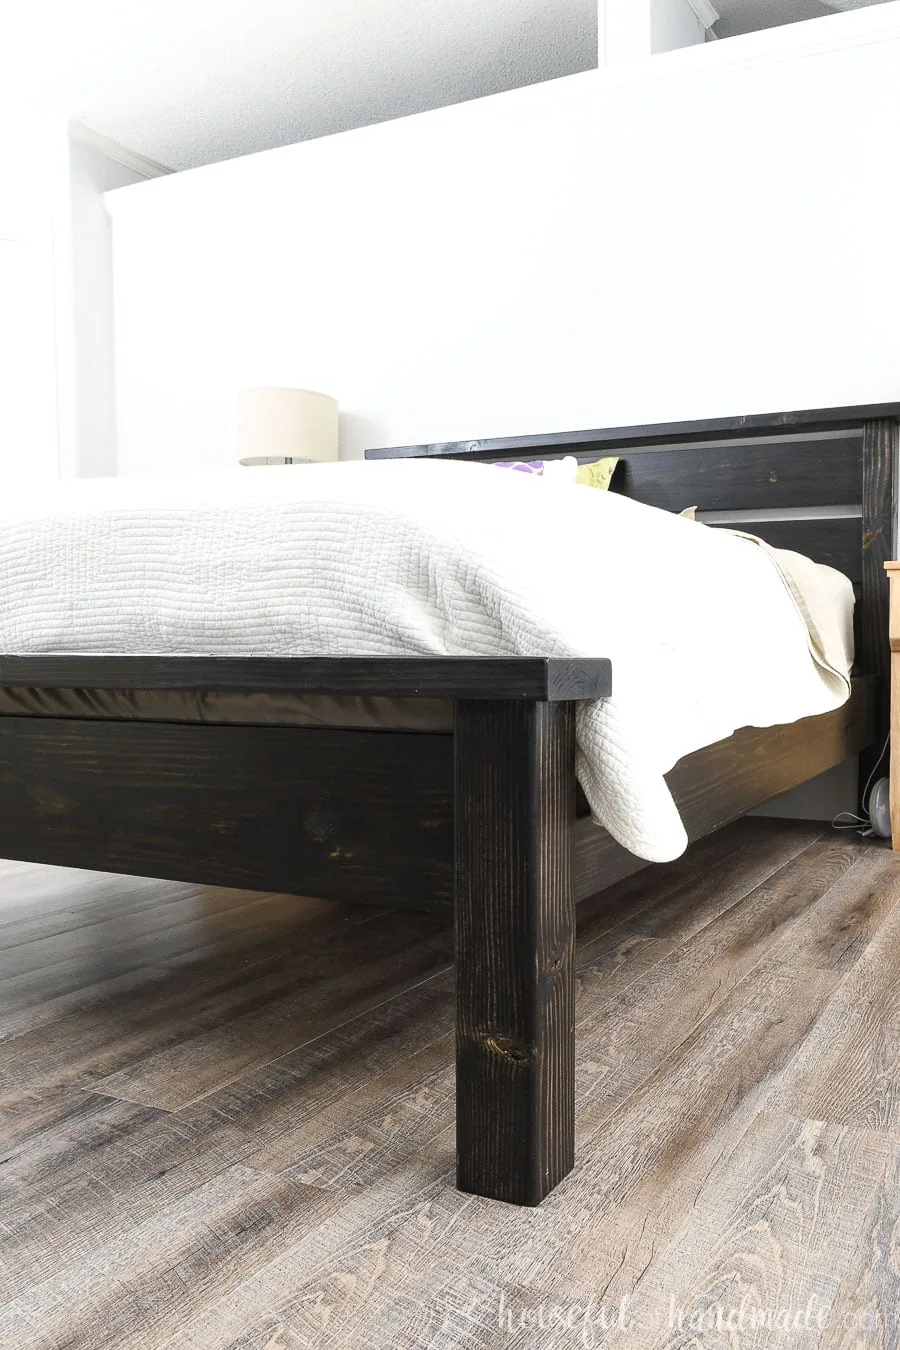 Side view of the black queen bed frame with headboard and footboard made from inexpensive lumber.